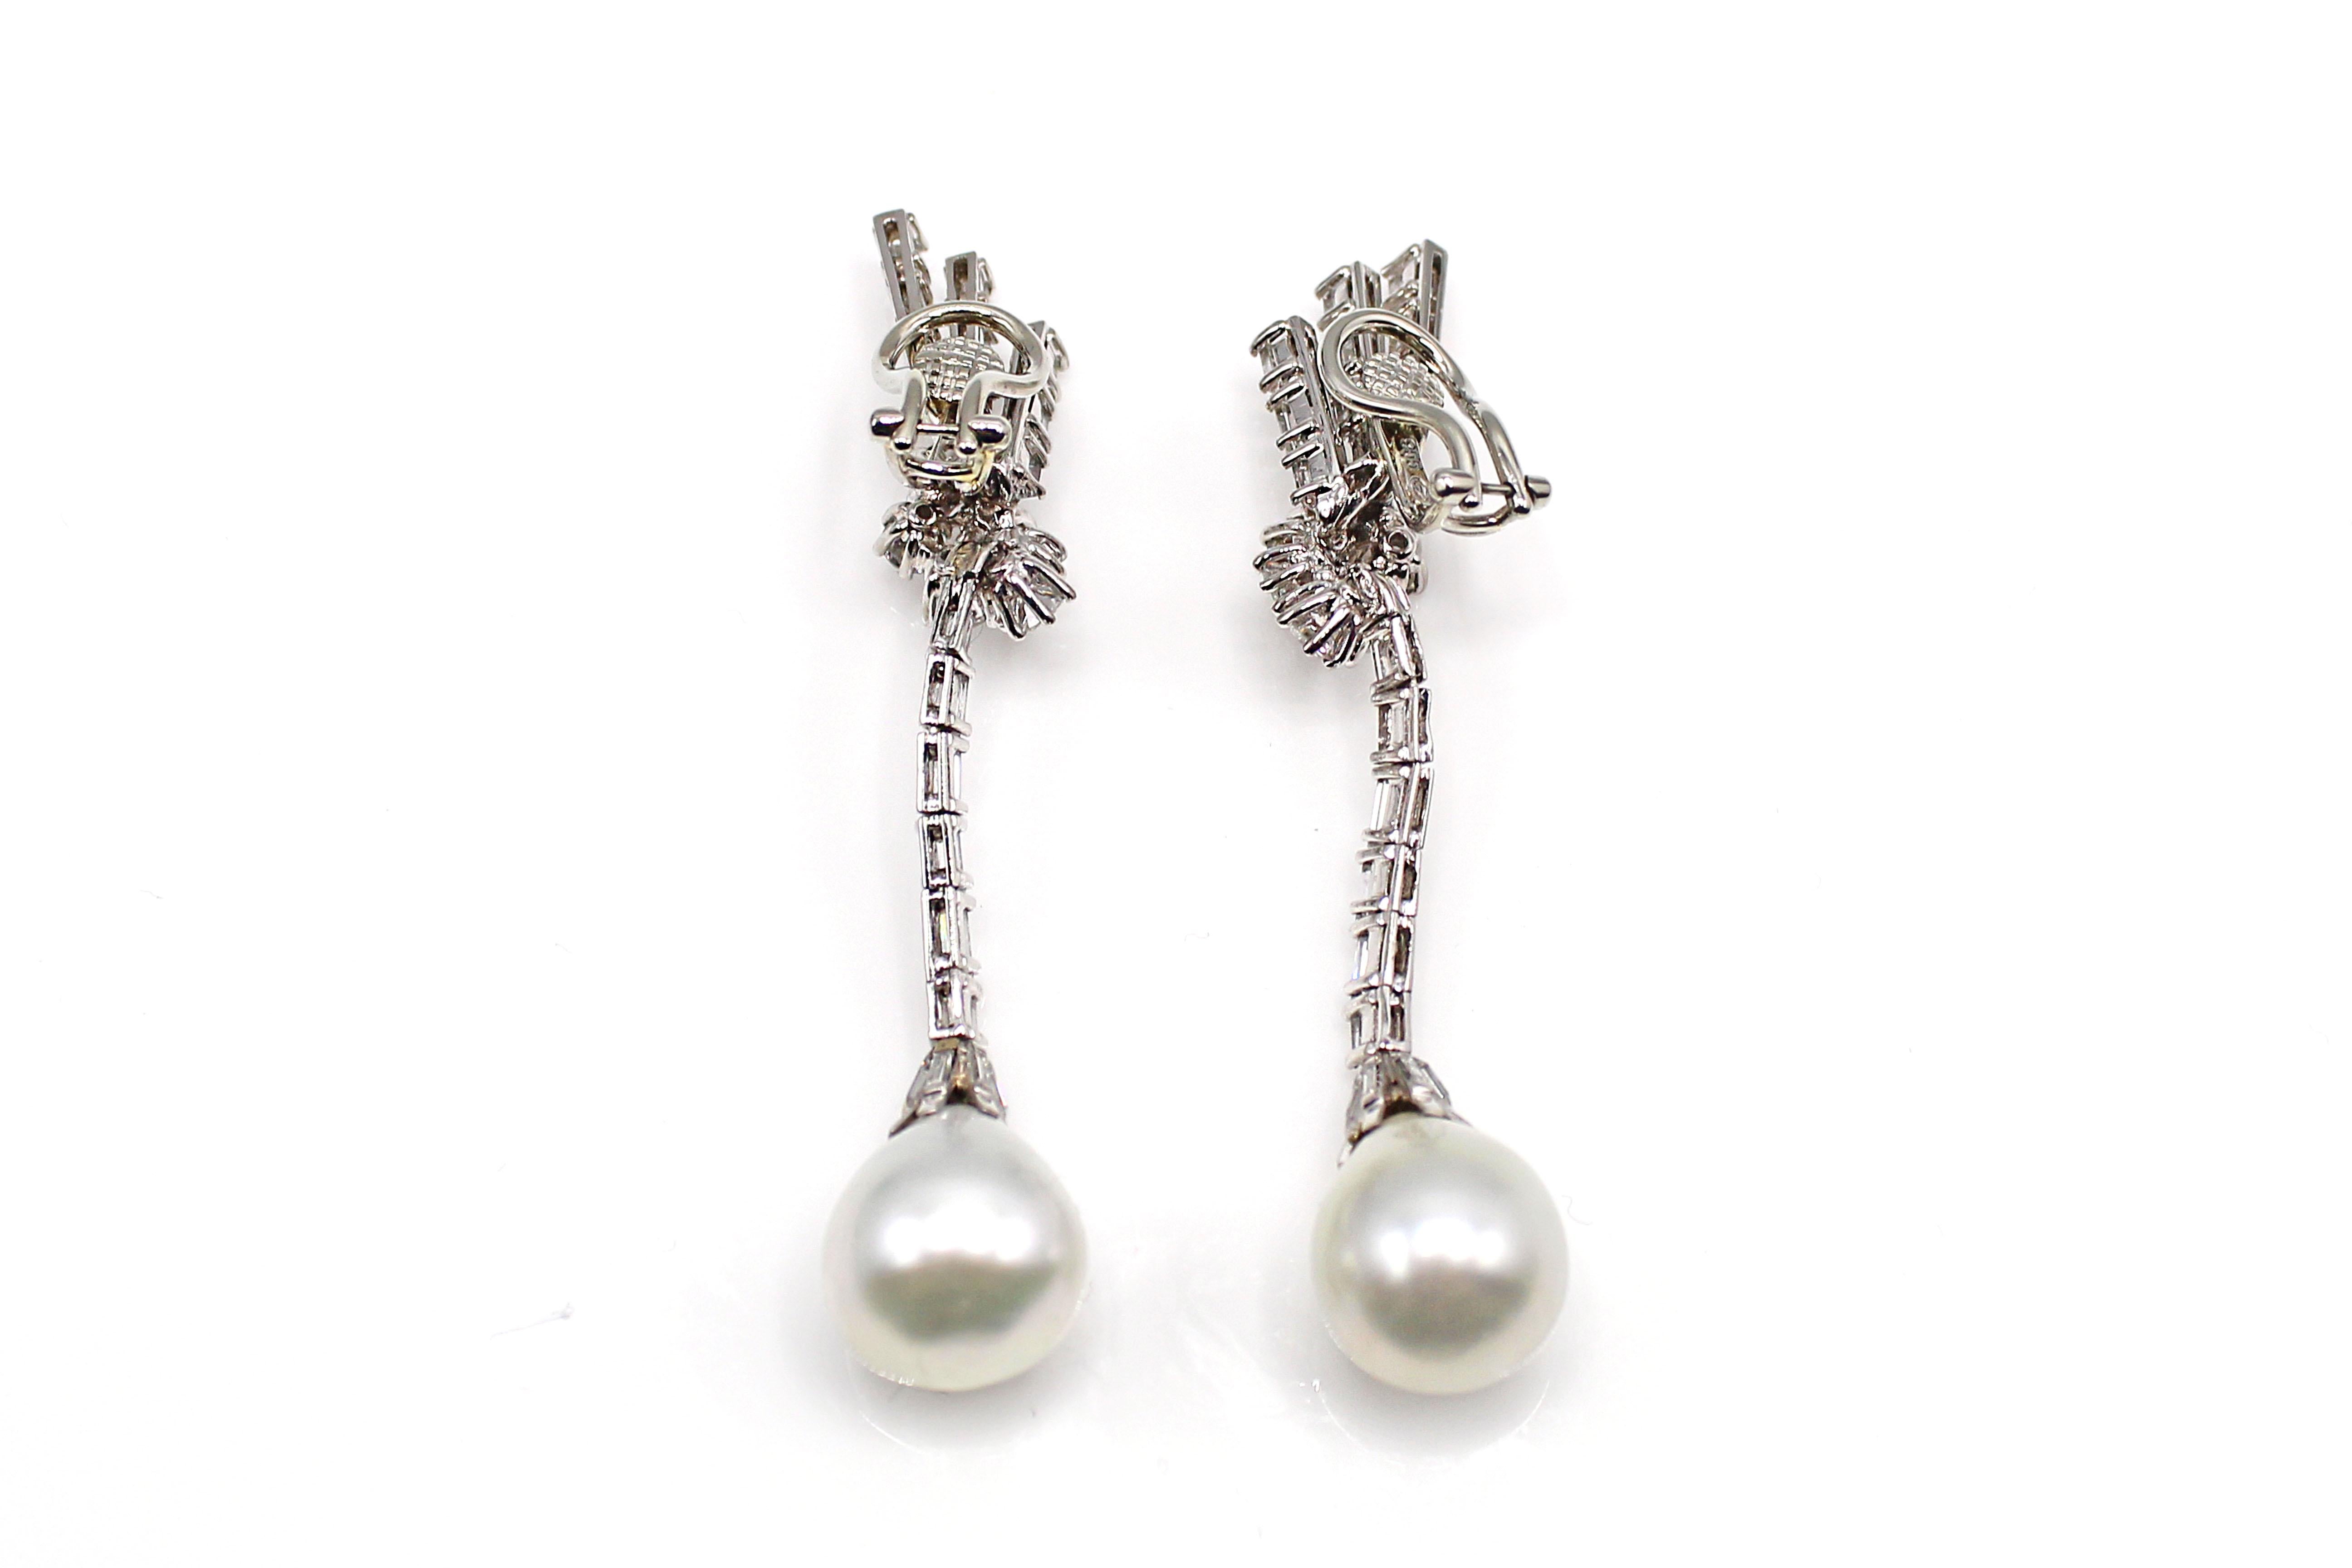 A pair of perfectly matched 13 mm bright white and lustrous South Sea  pearls extend 2 inches from the top of these beautifully hand-crafted earrings. Further embellished by 42 baguette and 12 round brilliant cut bright, white and sparkly diamonds